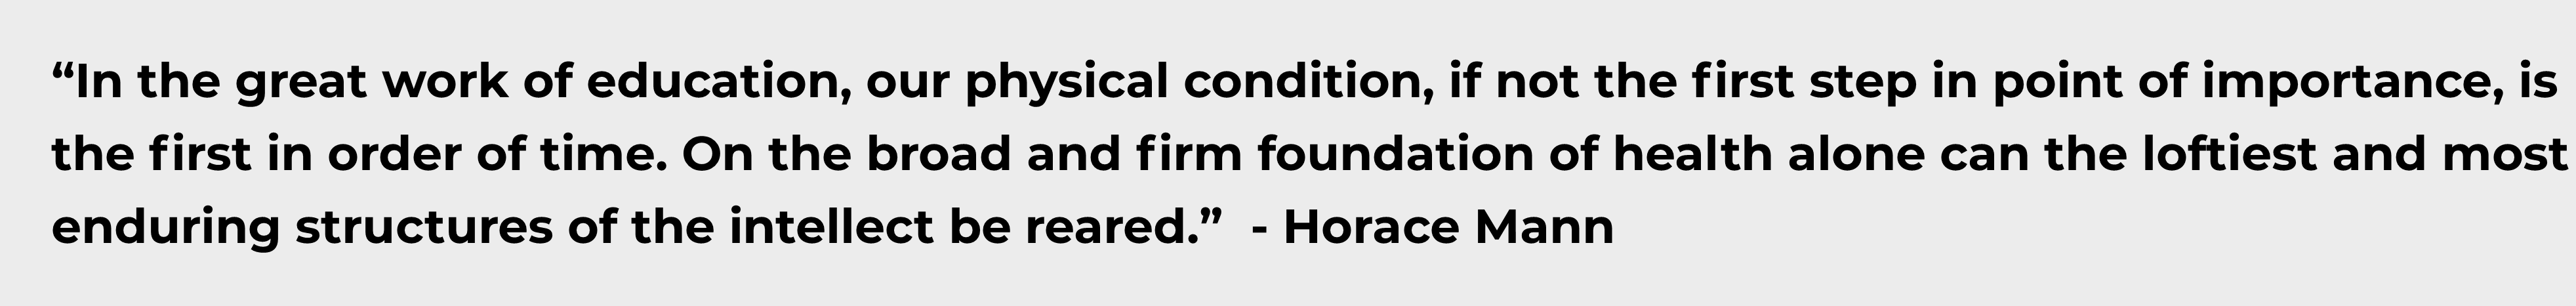 In the great work of education, our physical condition, if not the first step in point of importance, is the first in order of time. On the broad and firm foundation of health alone can the loftiest and most enduring structures of the intellect be reared. - Horace Mann